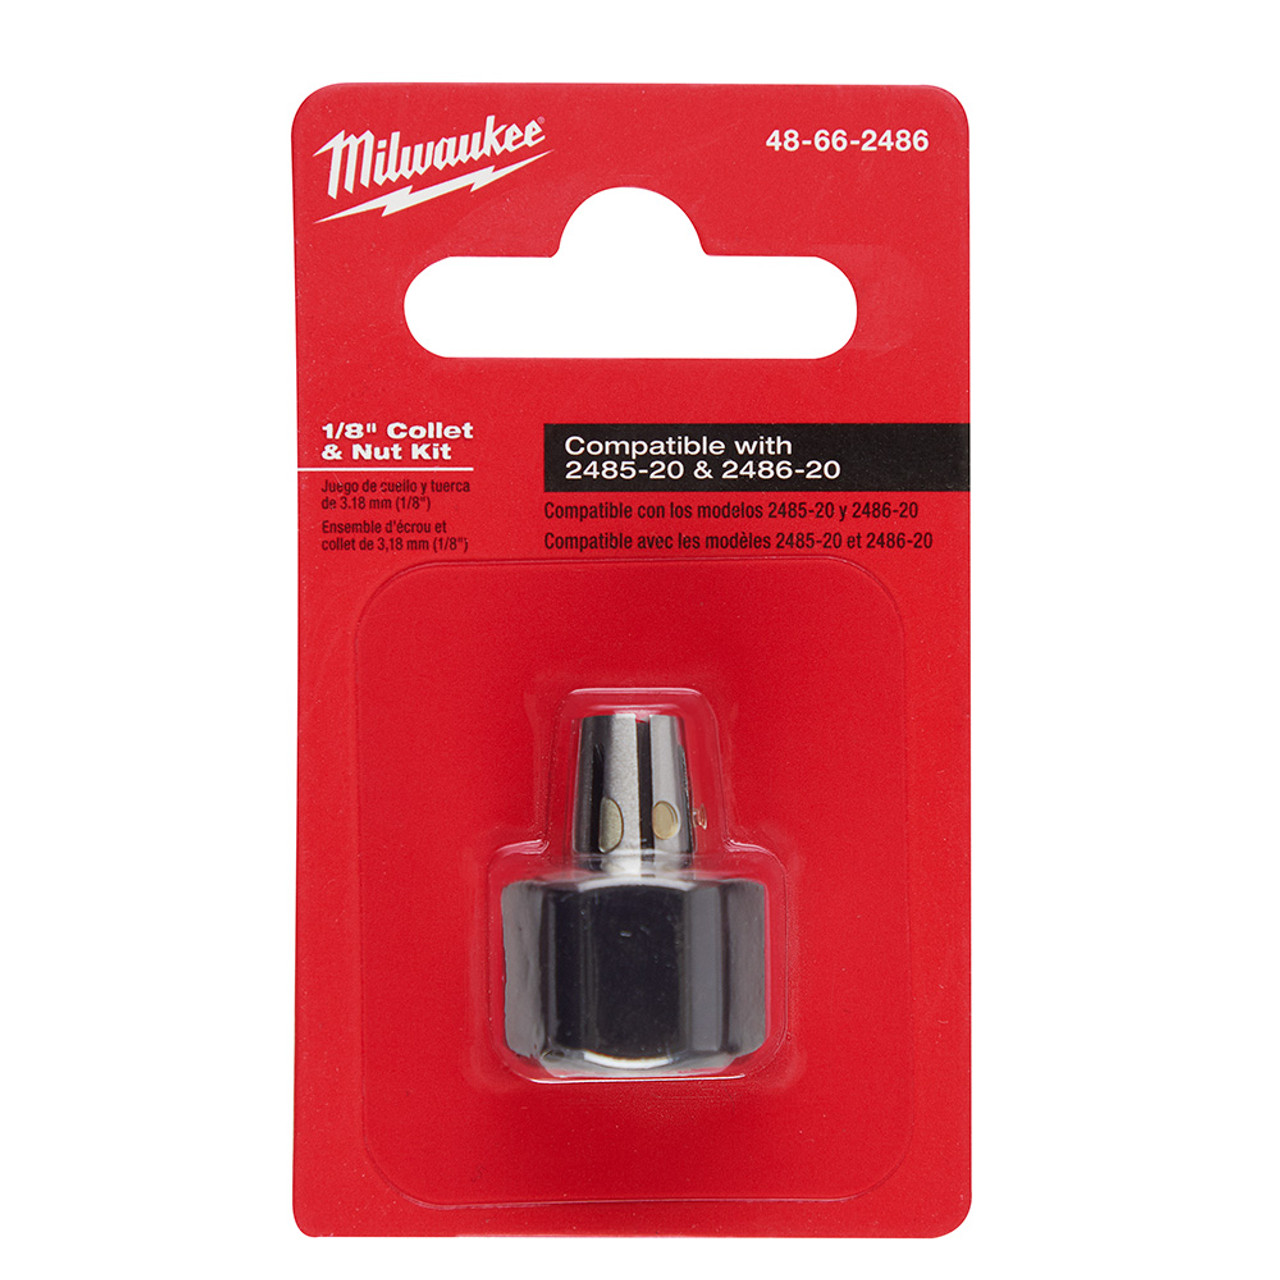 Milwaukee 48-66-2486 1/8 in. Collet & Nut Assembly